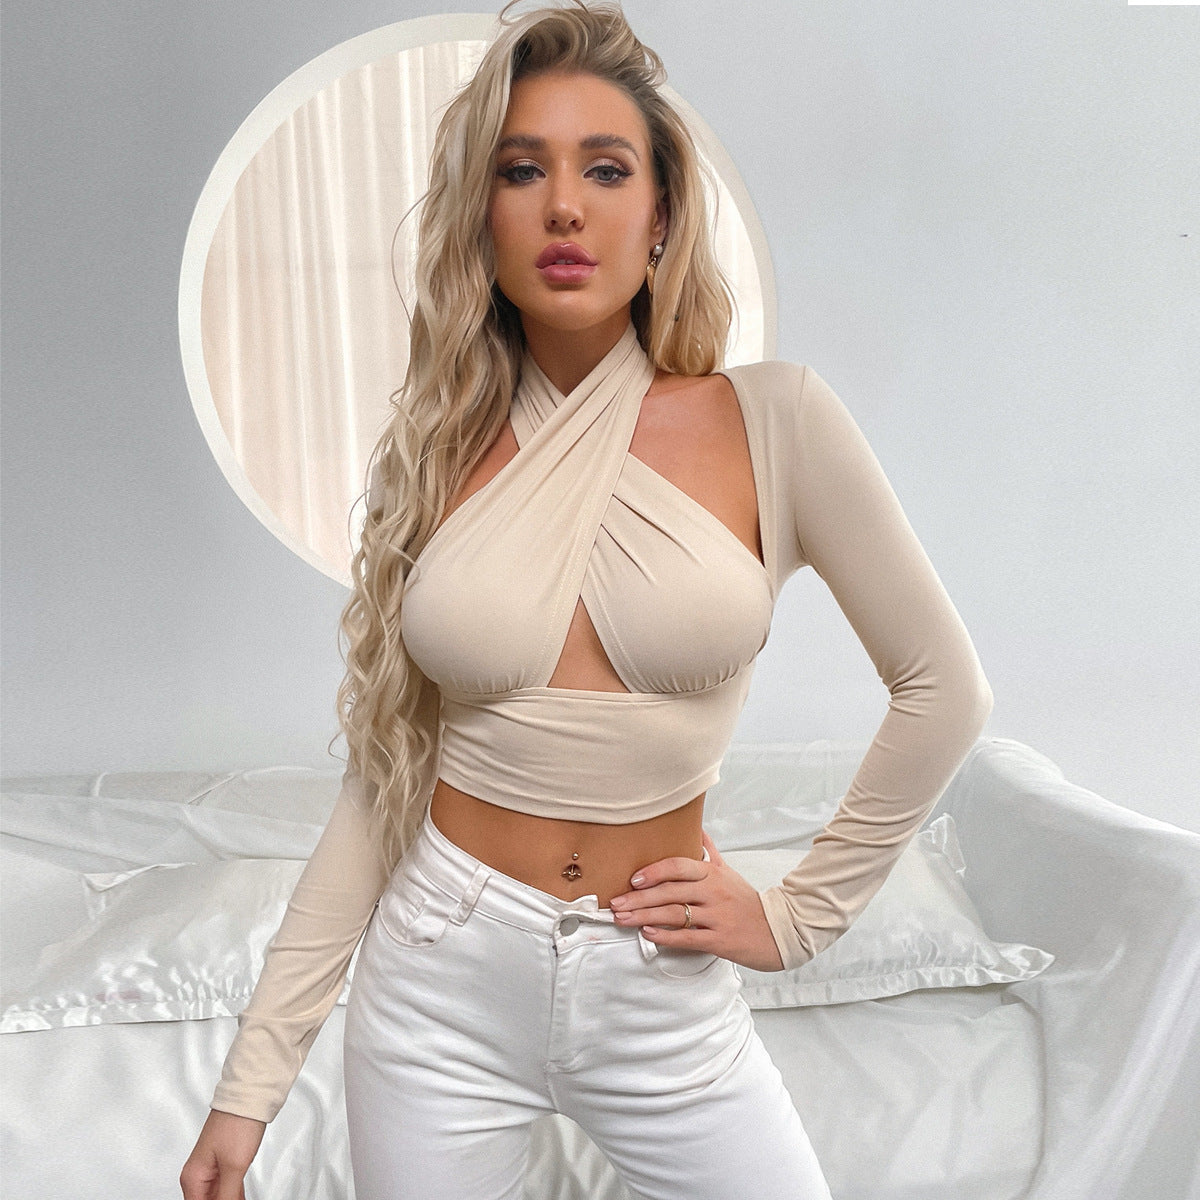 Sexy Cross-neck Hollow Bottoming Shirt Ladies Top